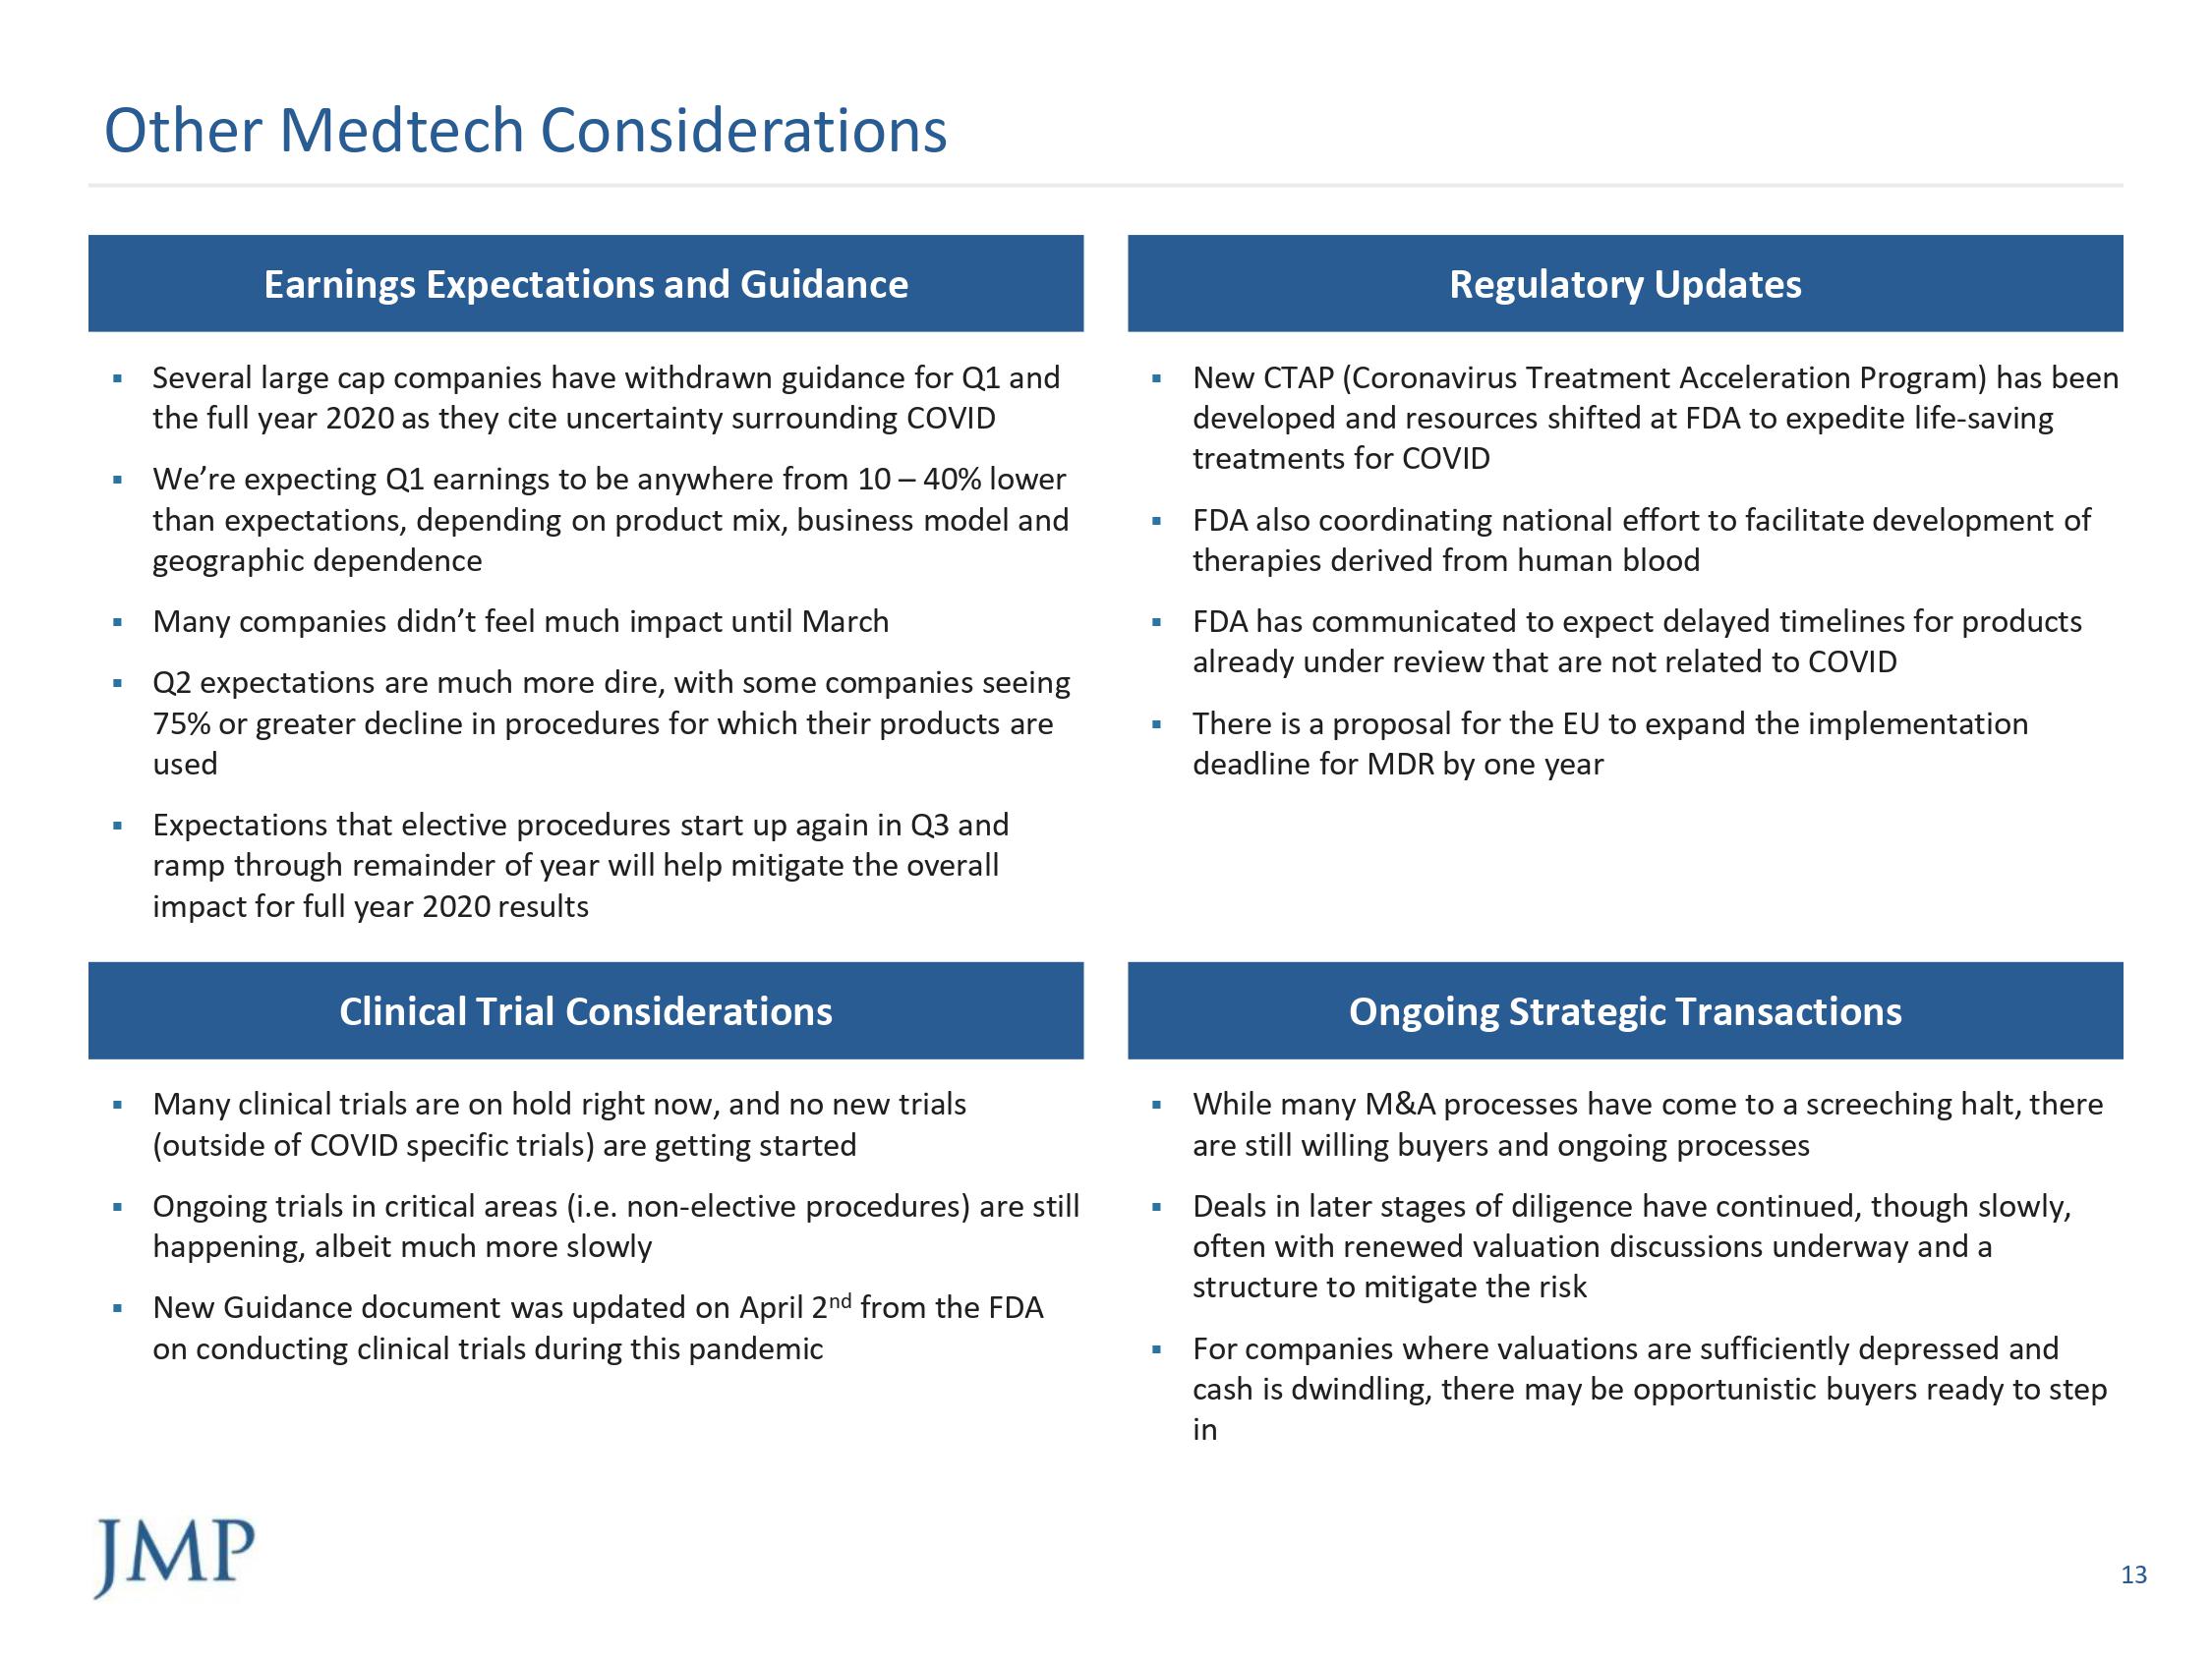 How COVID-19 is impacting the MedTech sector?